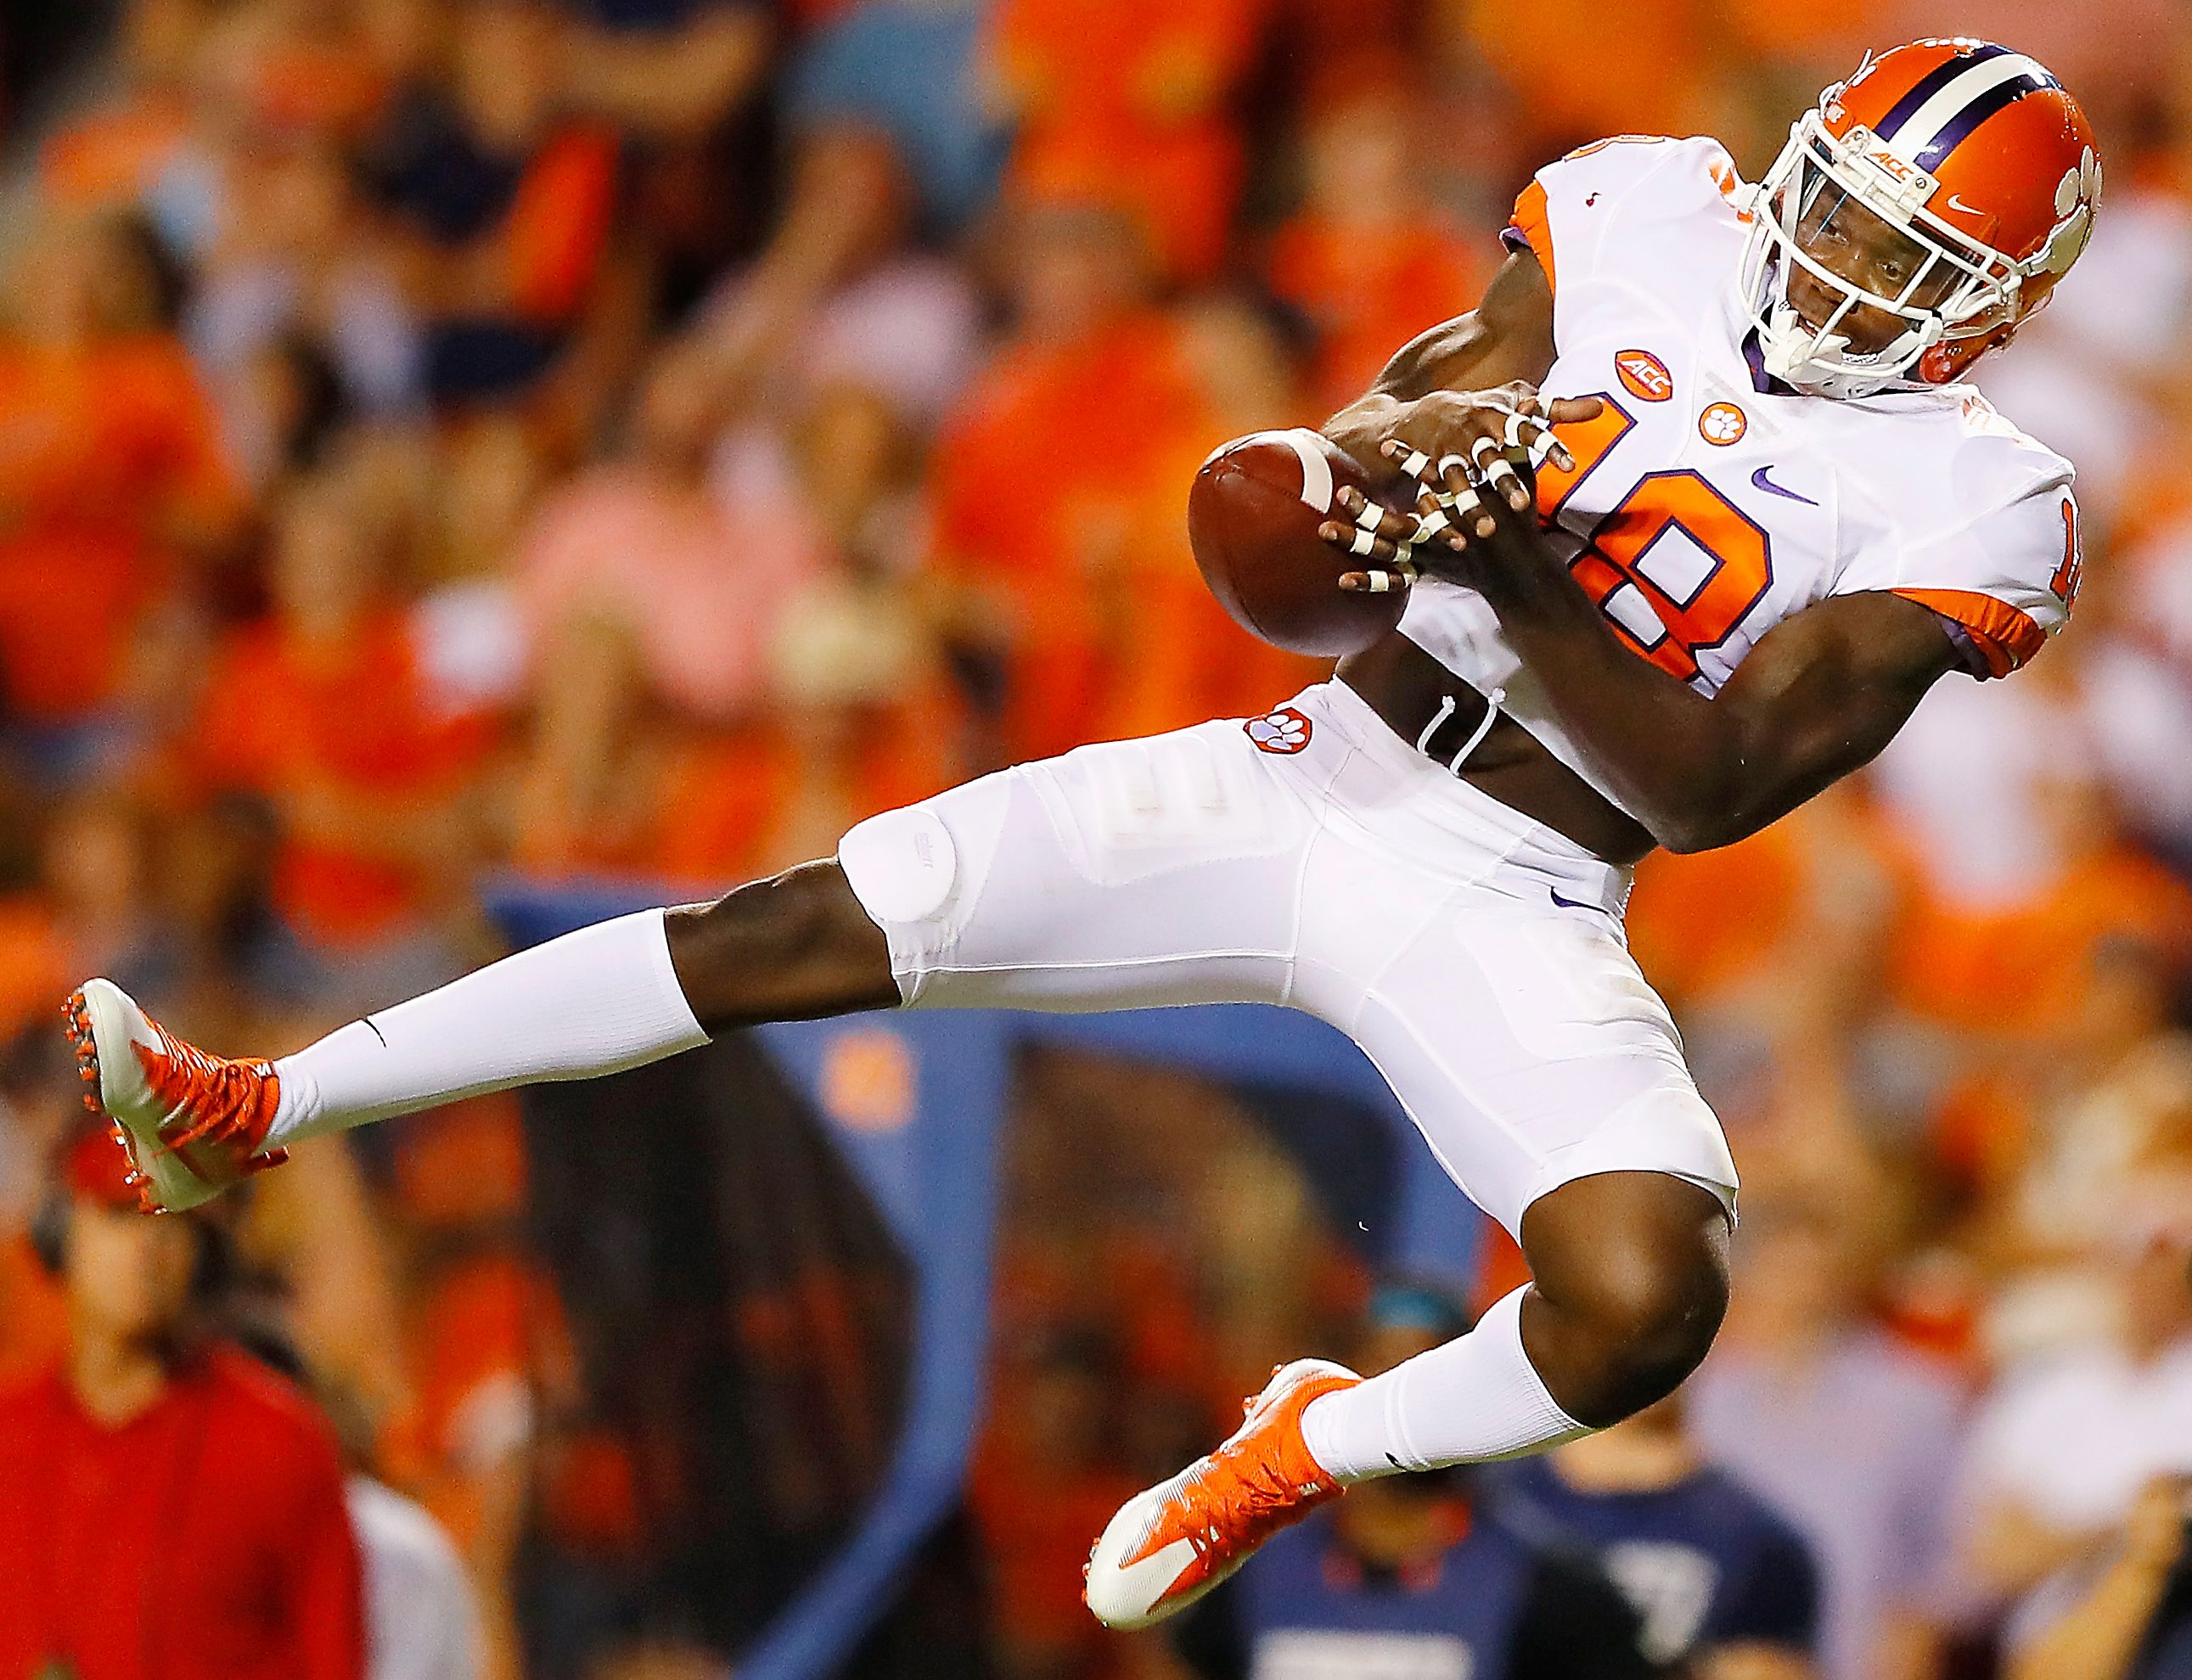 Clemson on the defensive Photos Best of College Football Kickoff